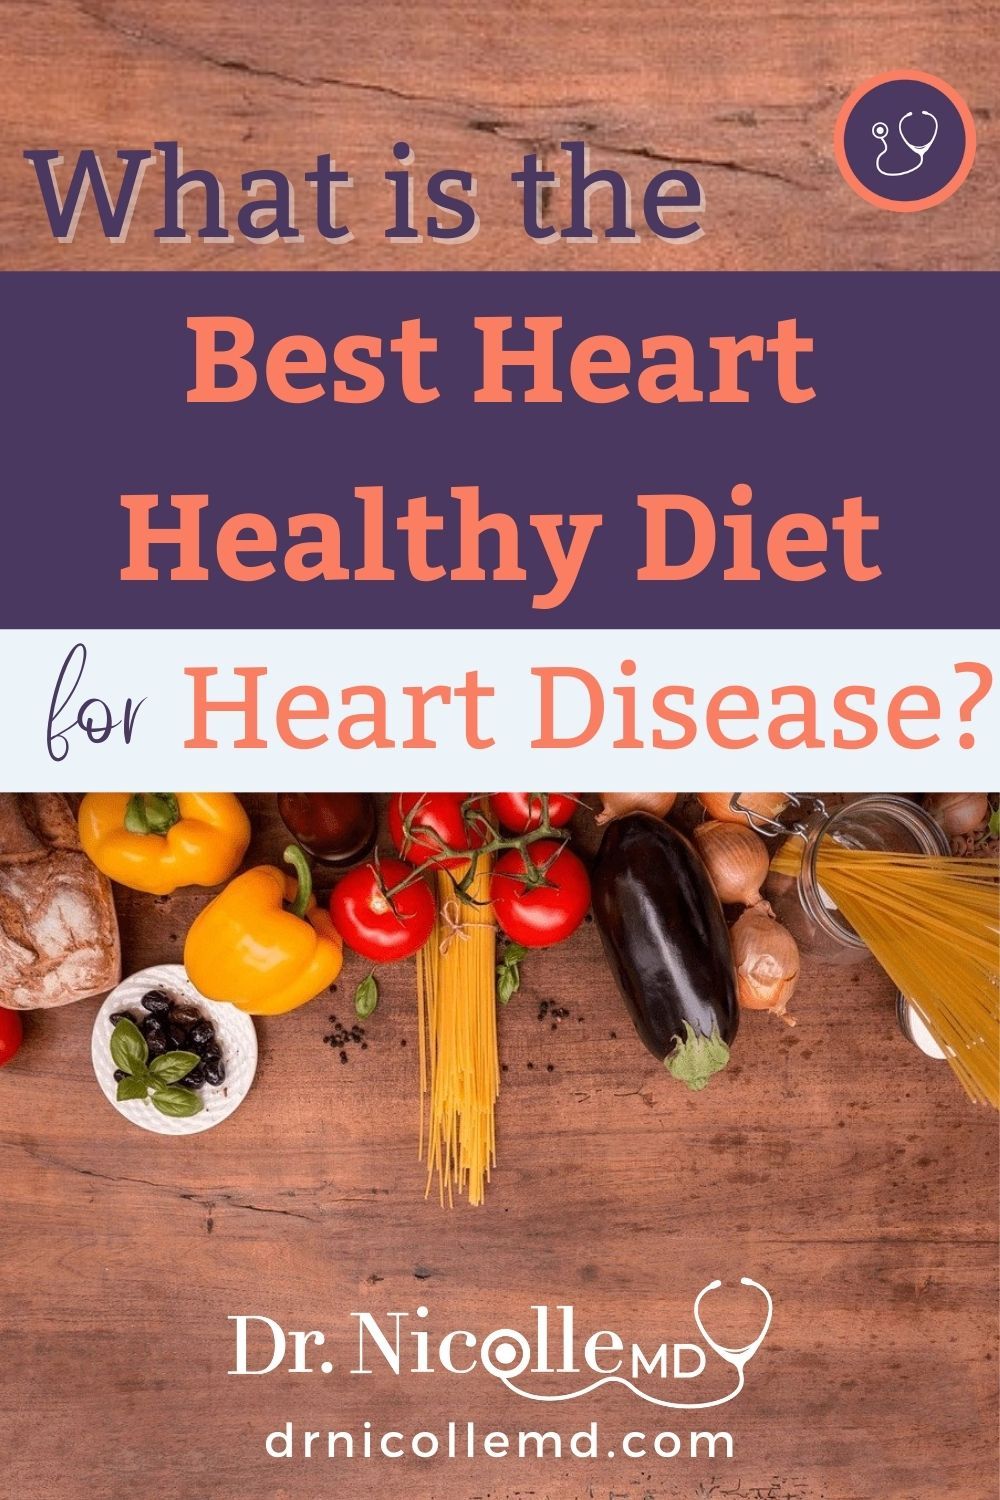 What Is the Best Heart Healthy Diet for Heart Disease?